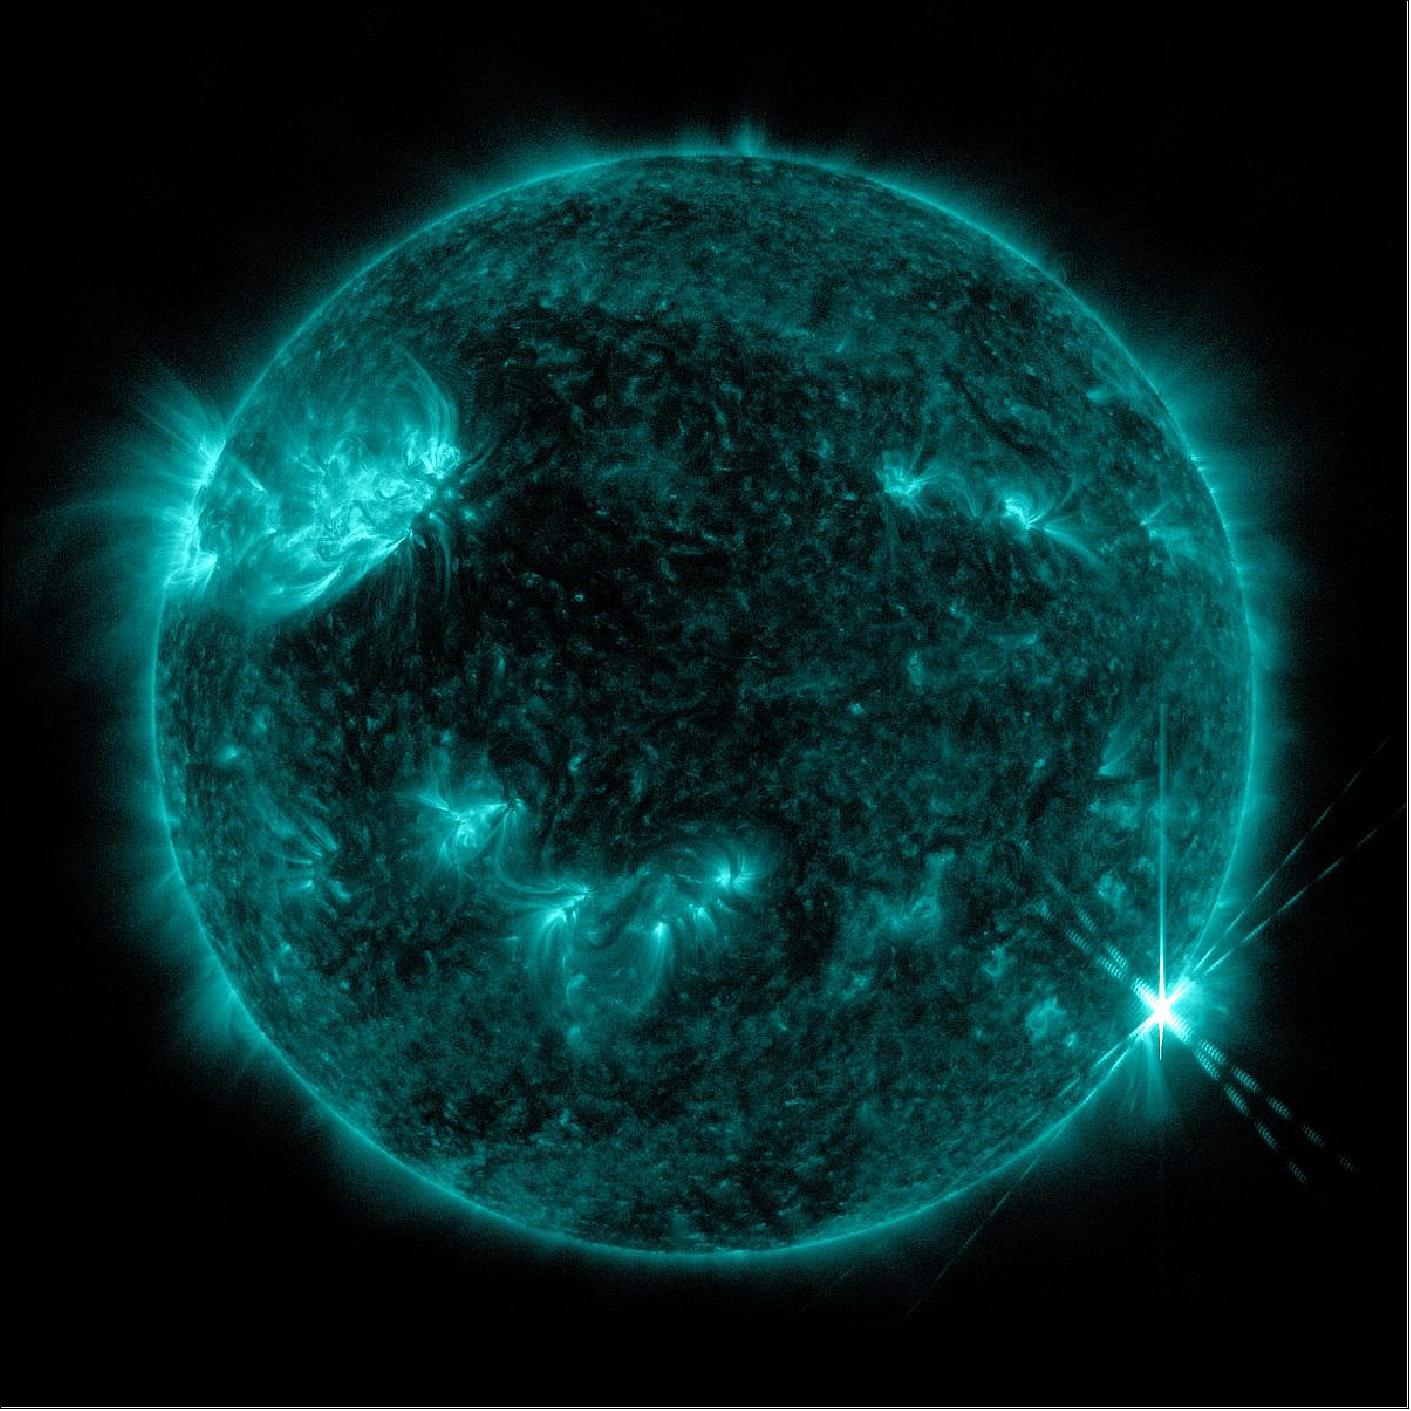 Figure 14: NASA's SDO captured this image of a solar flare – as seen in the bright flash in the lower right portion of the image– at 11:57 p.m. EST on April 19, 2022. The image shows a subset of extreme ultraviolet light that highlights the extremely hot material in flares and is colorized in SDO channel color blue (image credit NASA/SDO)